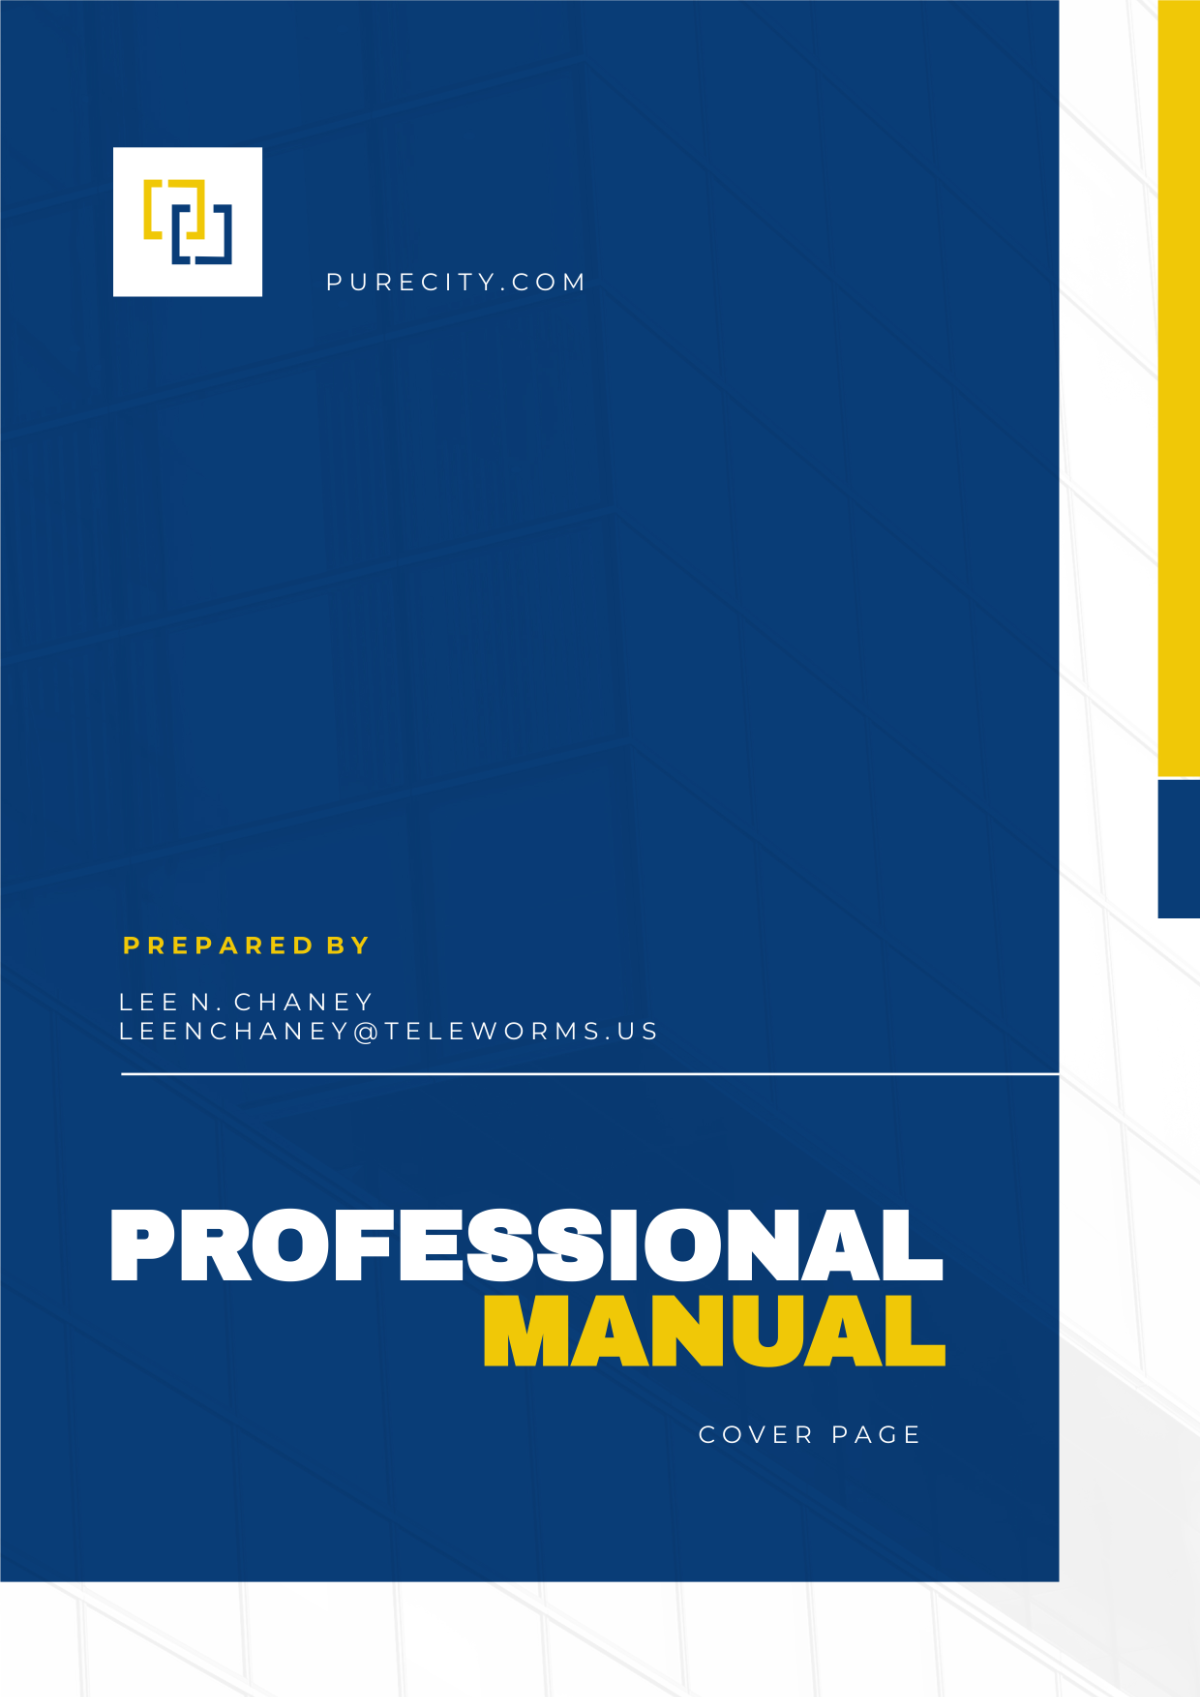 Professional Manual Cover Page